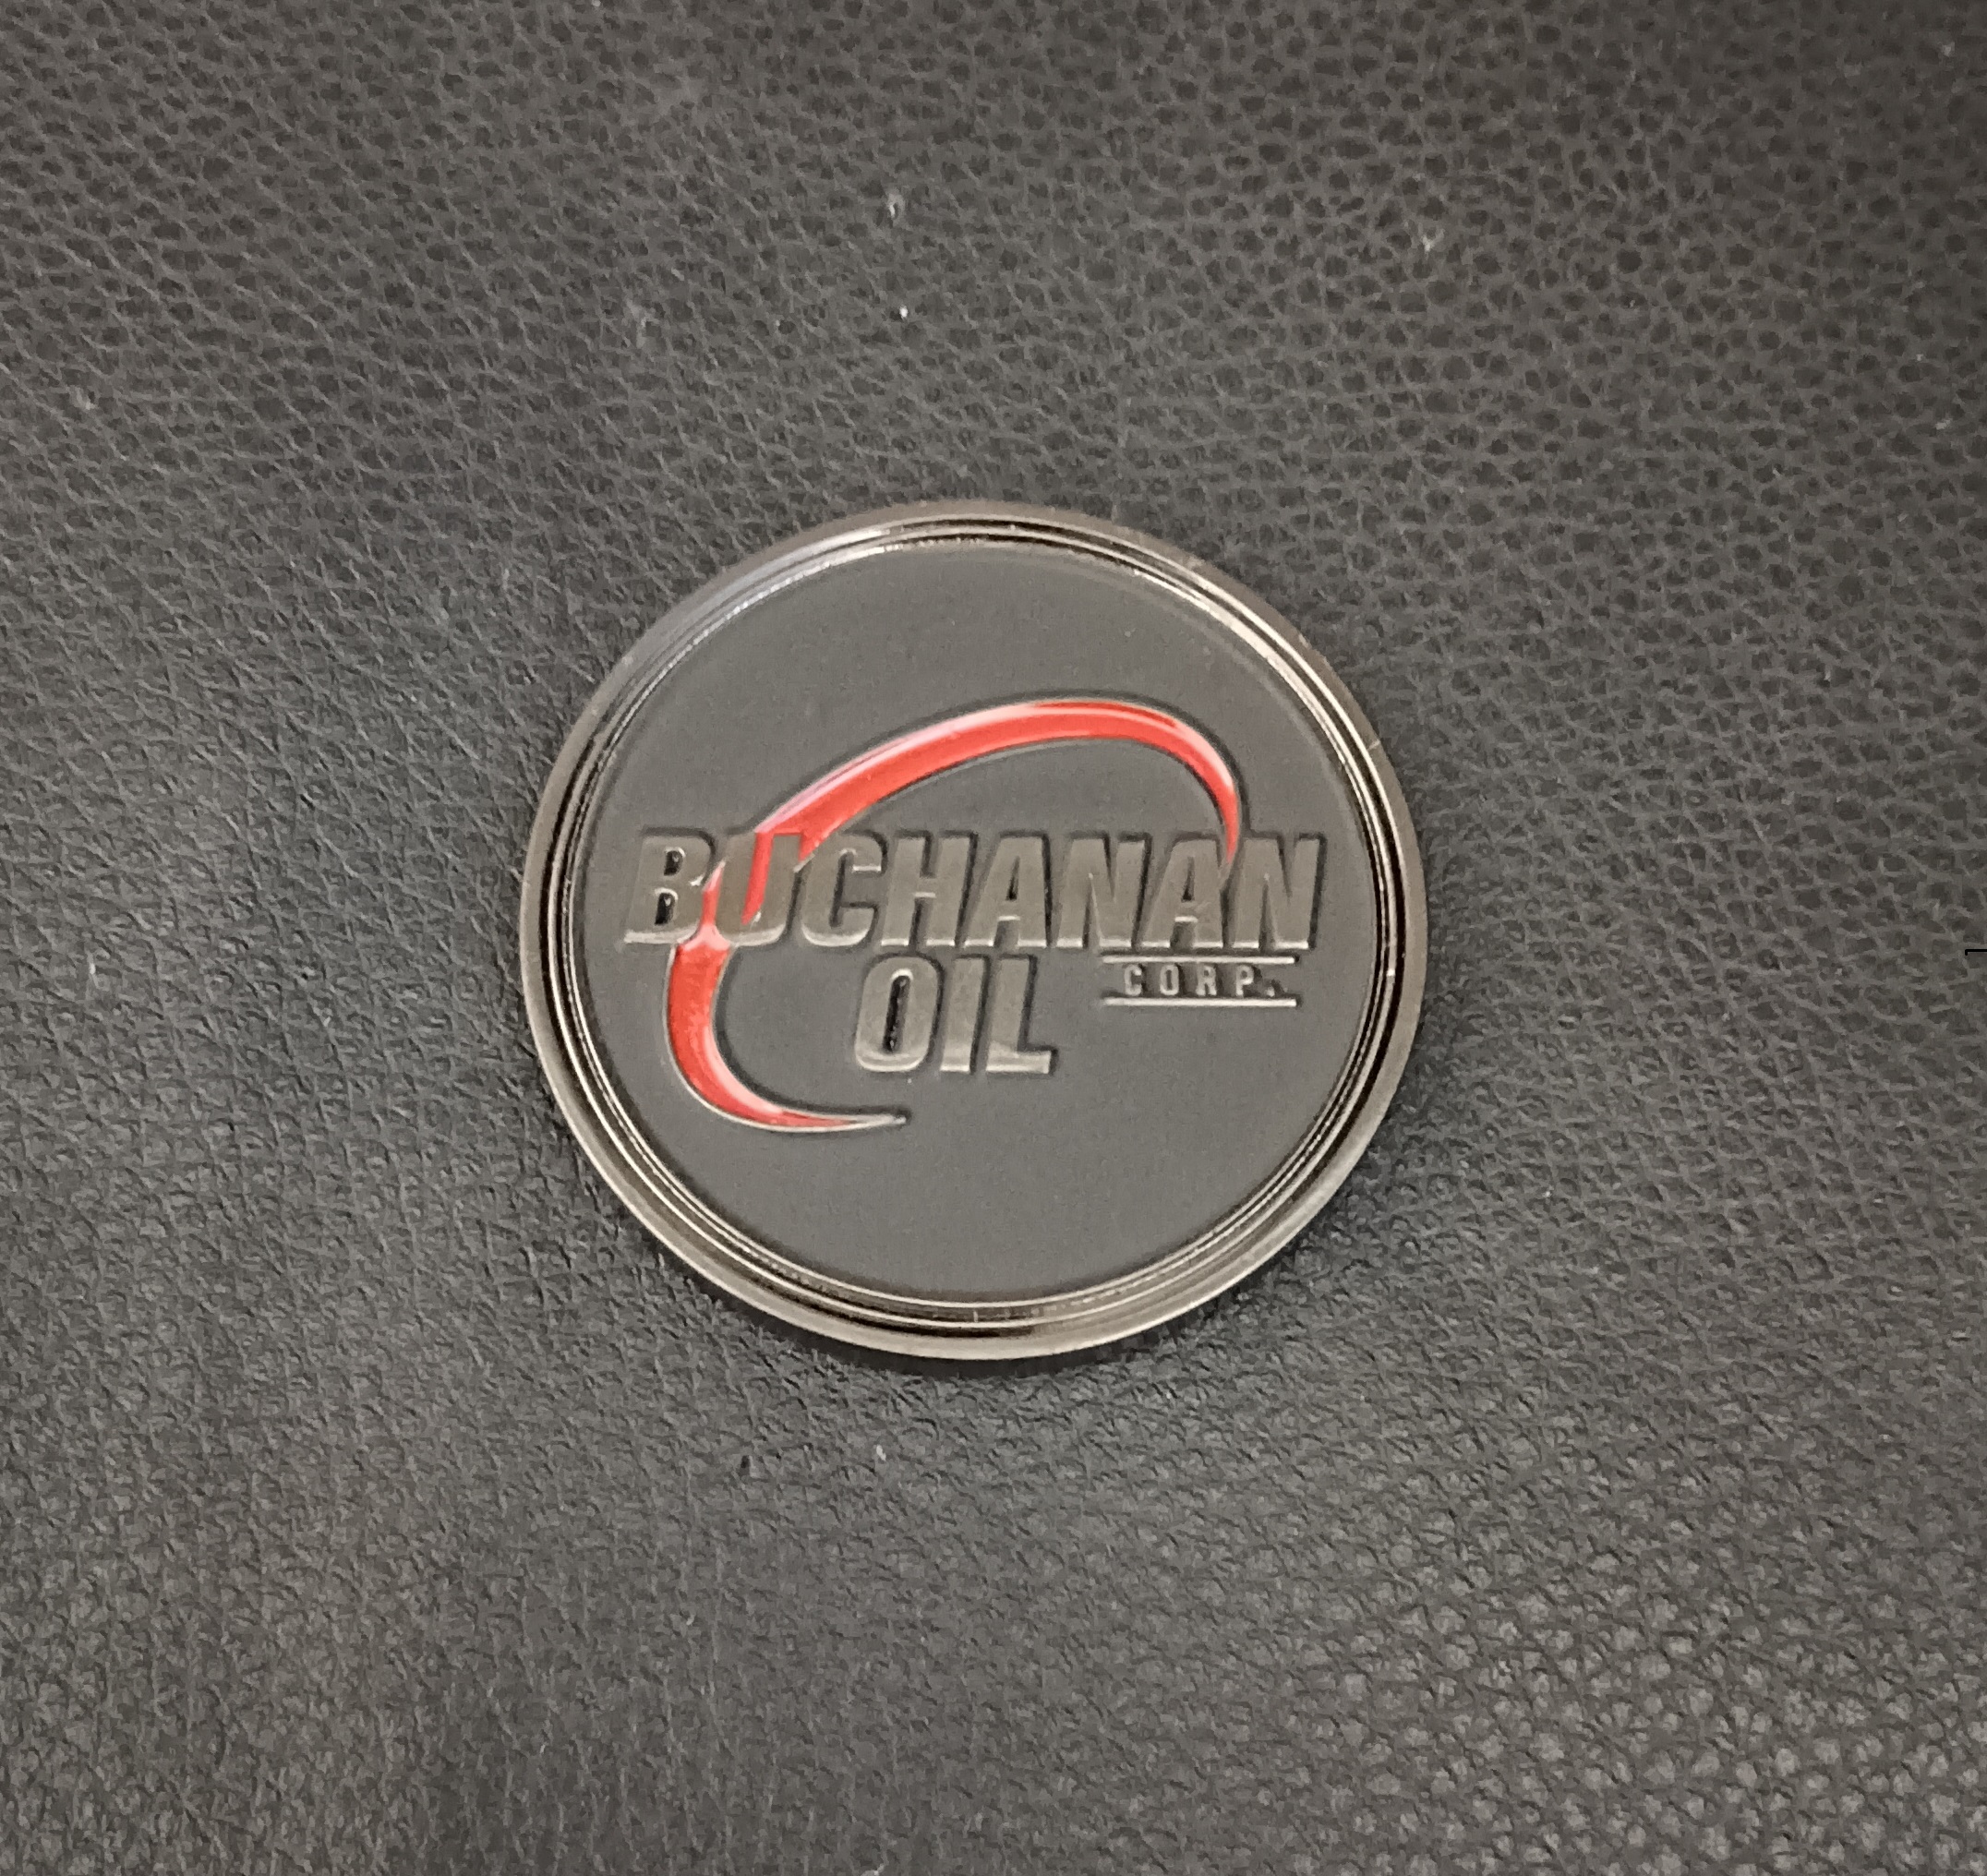 Oil Company Challenge Coin